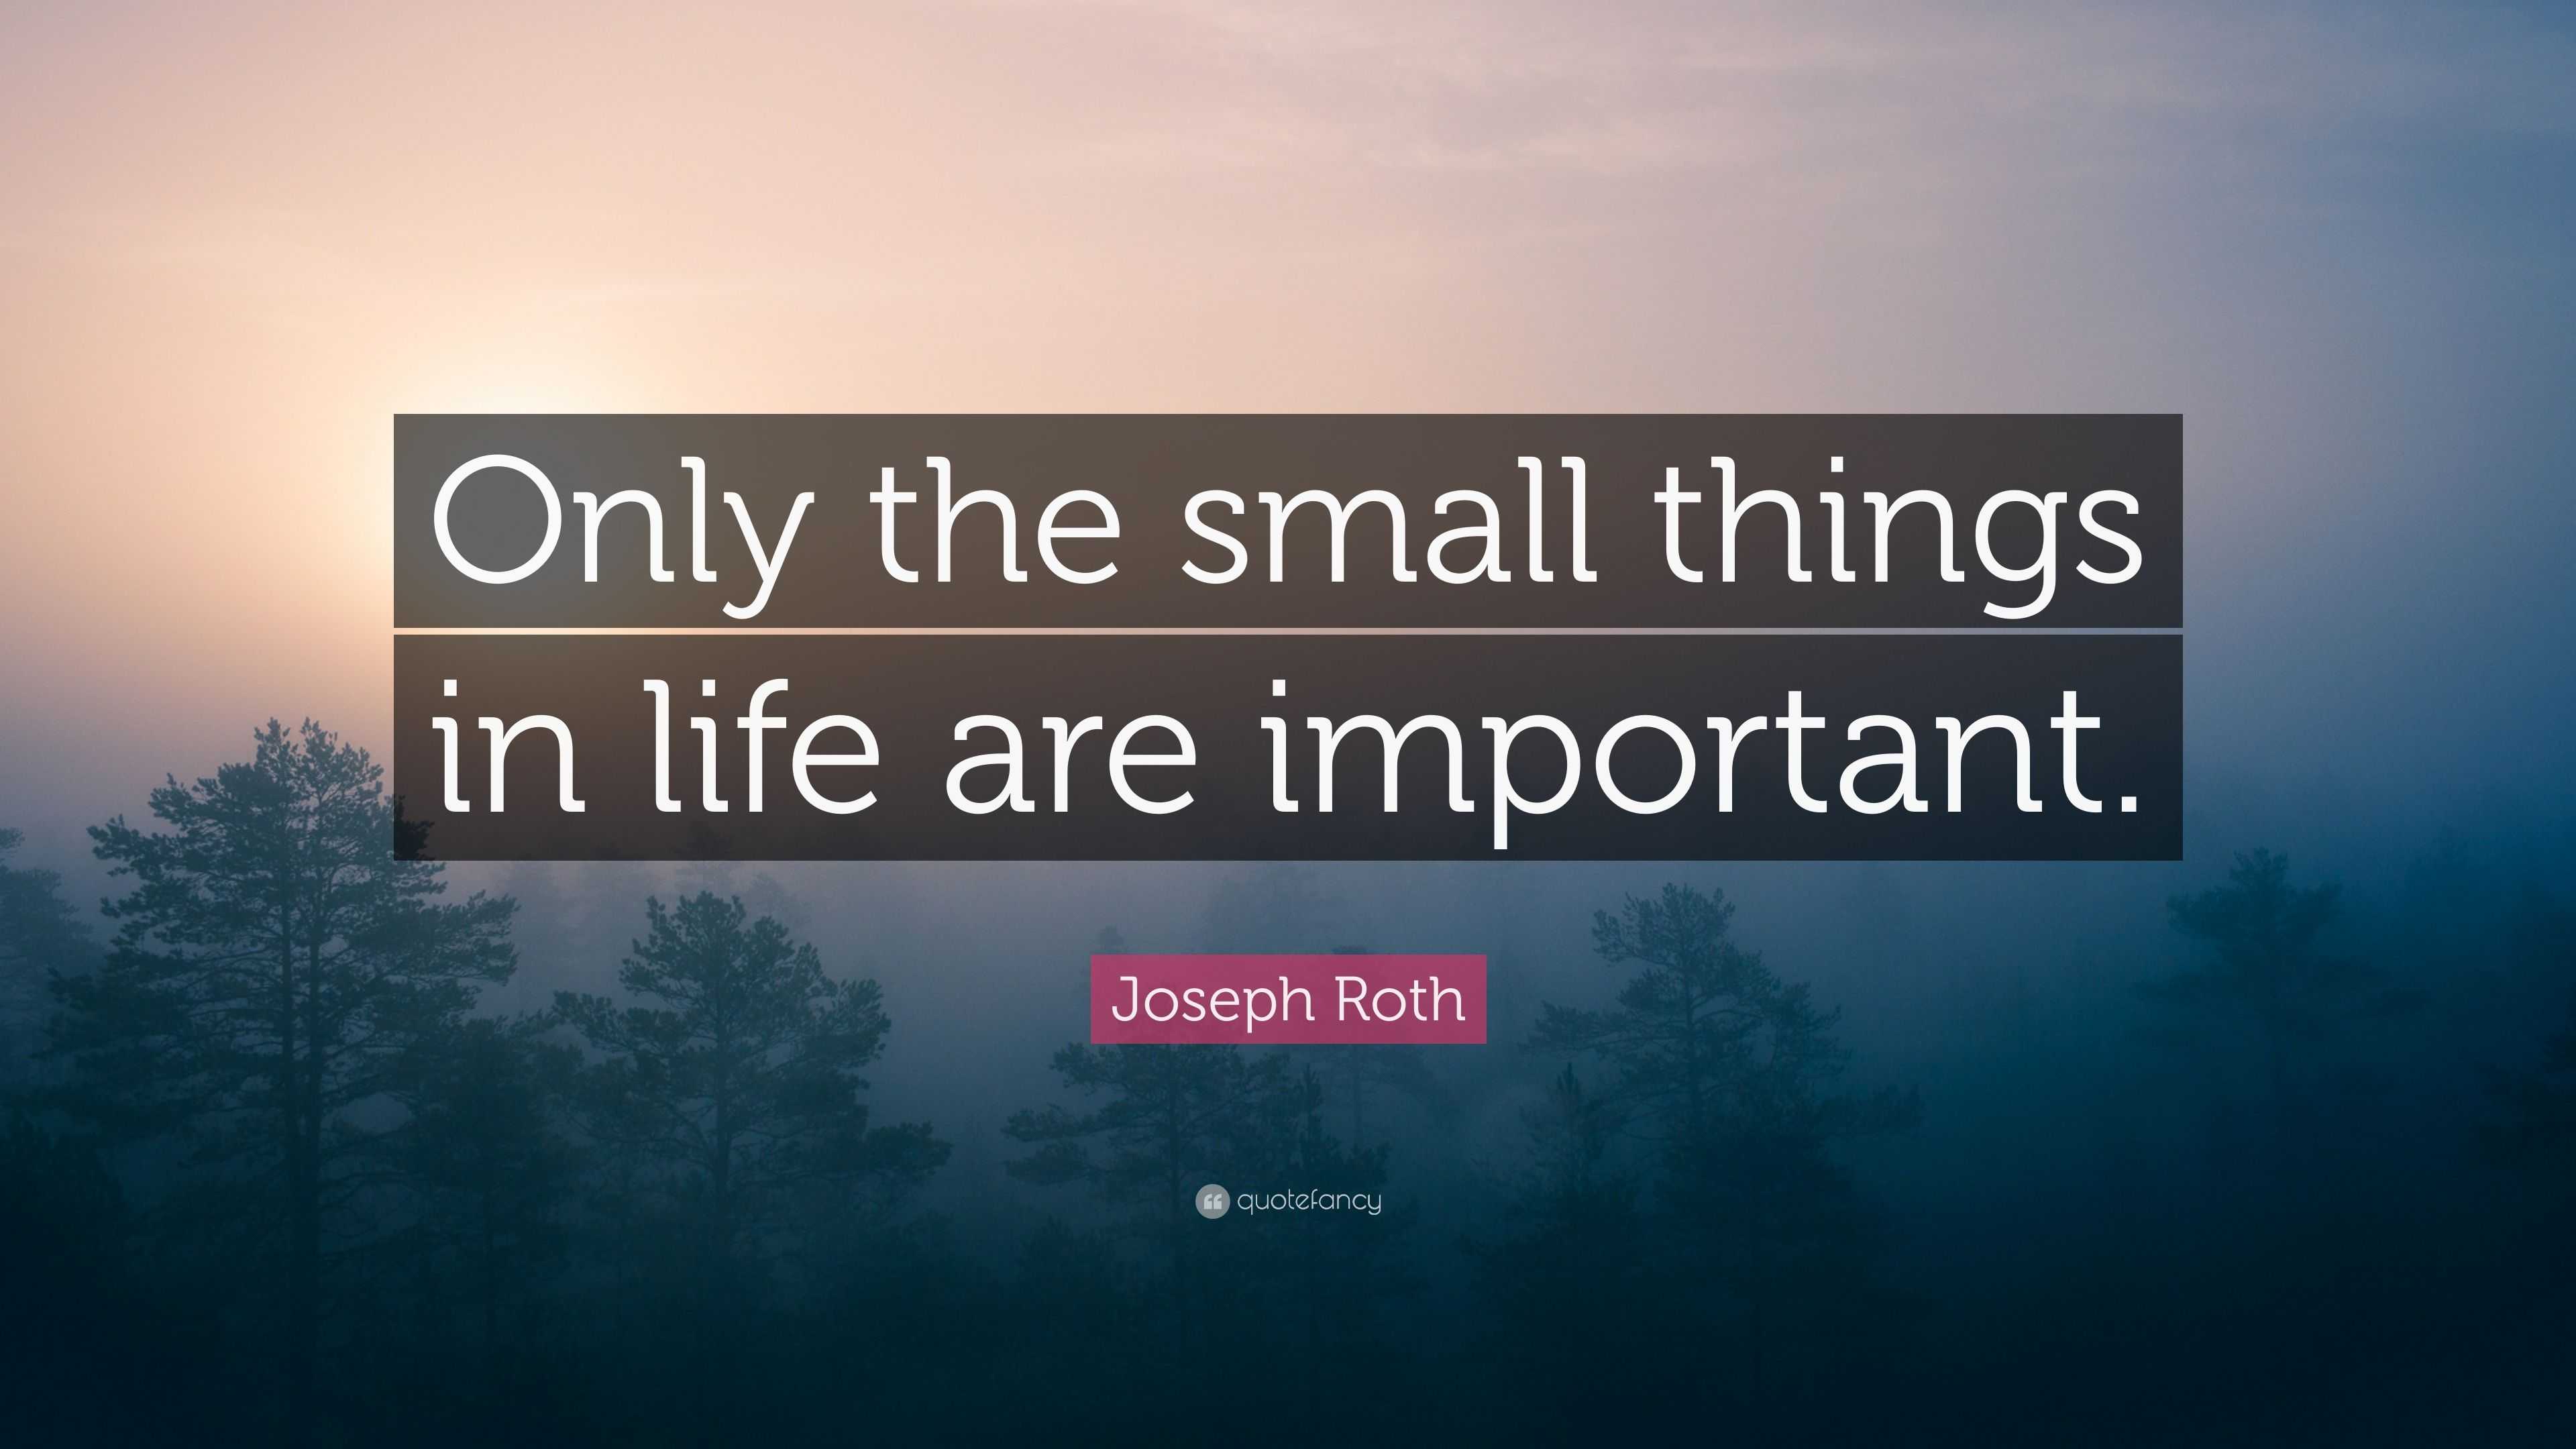 Joseph Roth Quote “ ly the small things in life are important ”